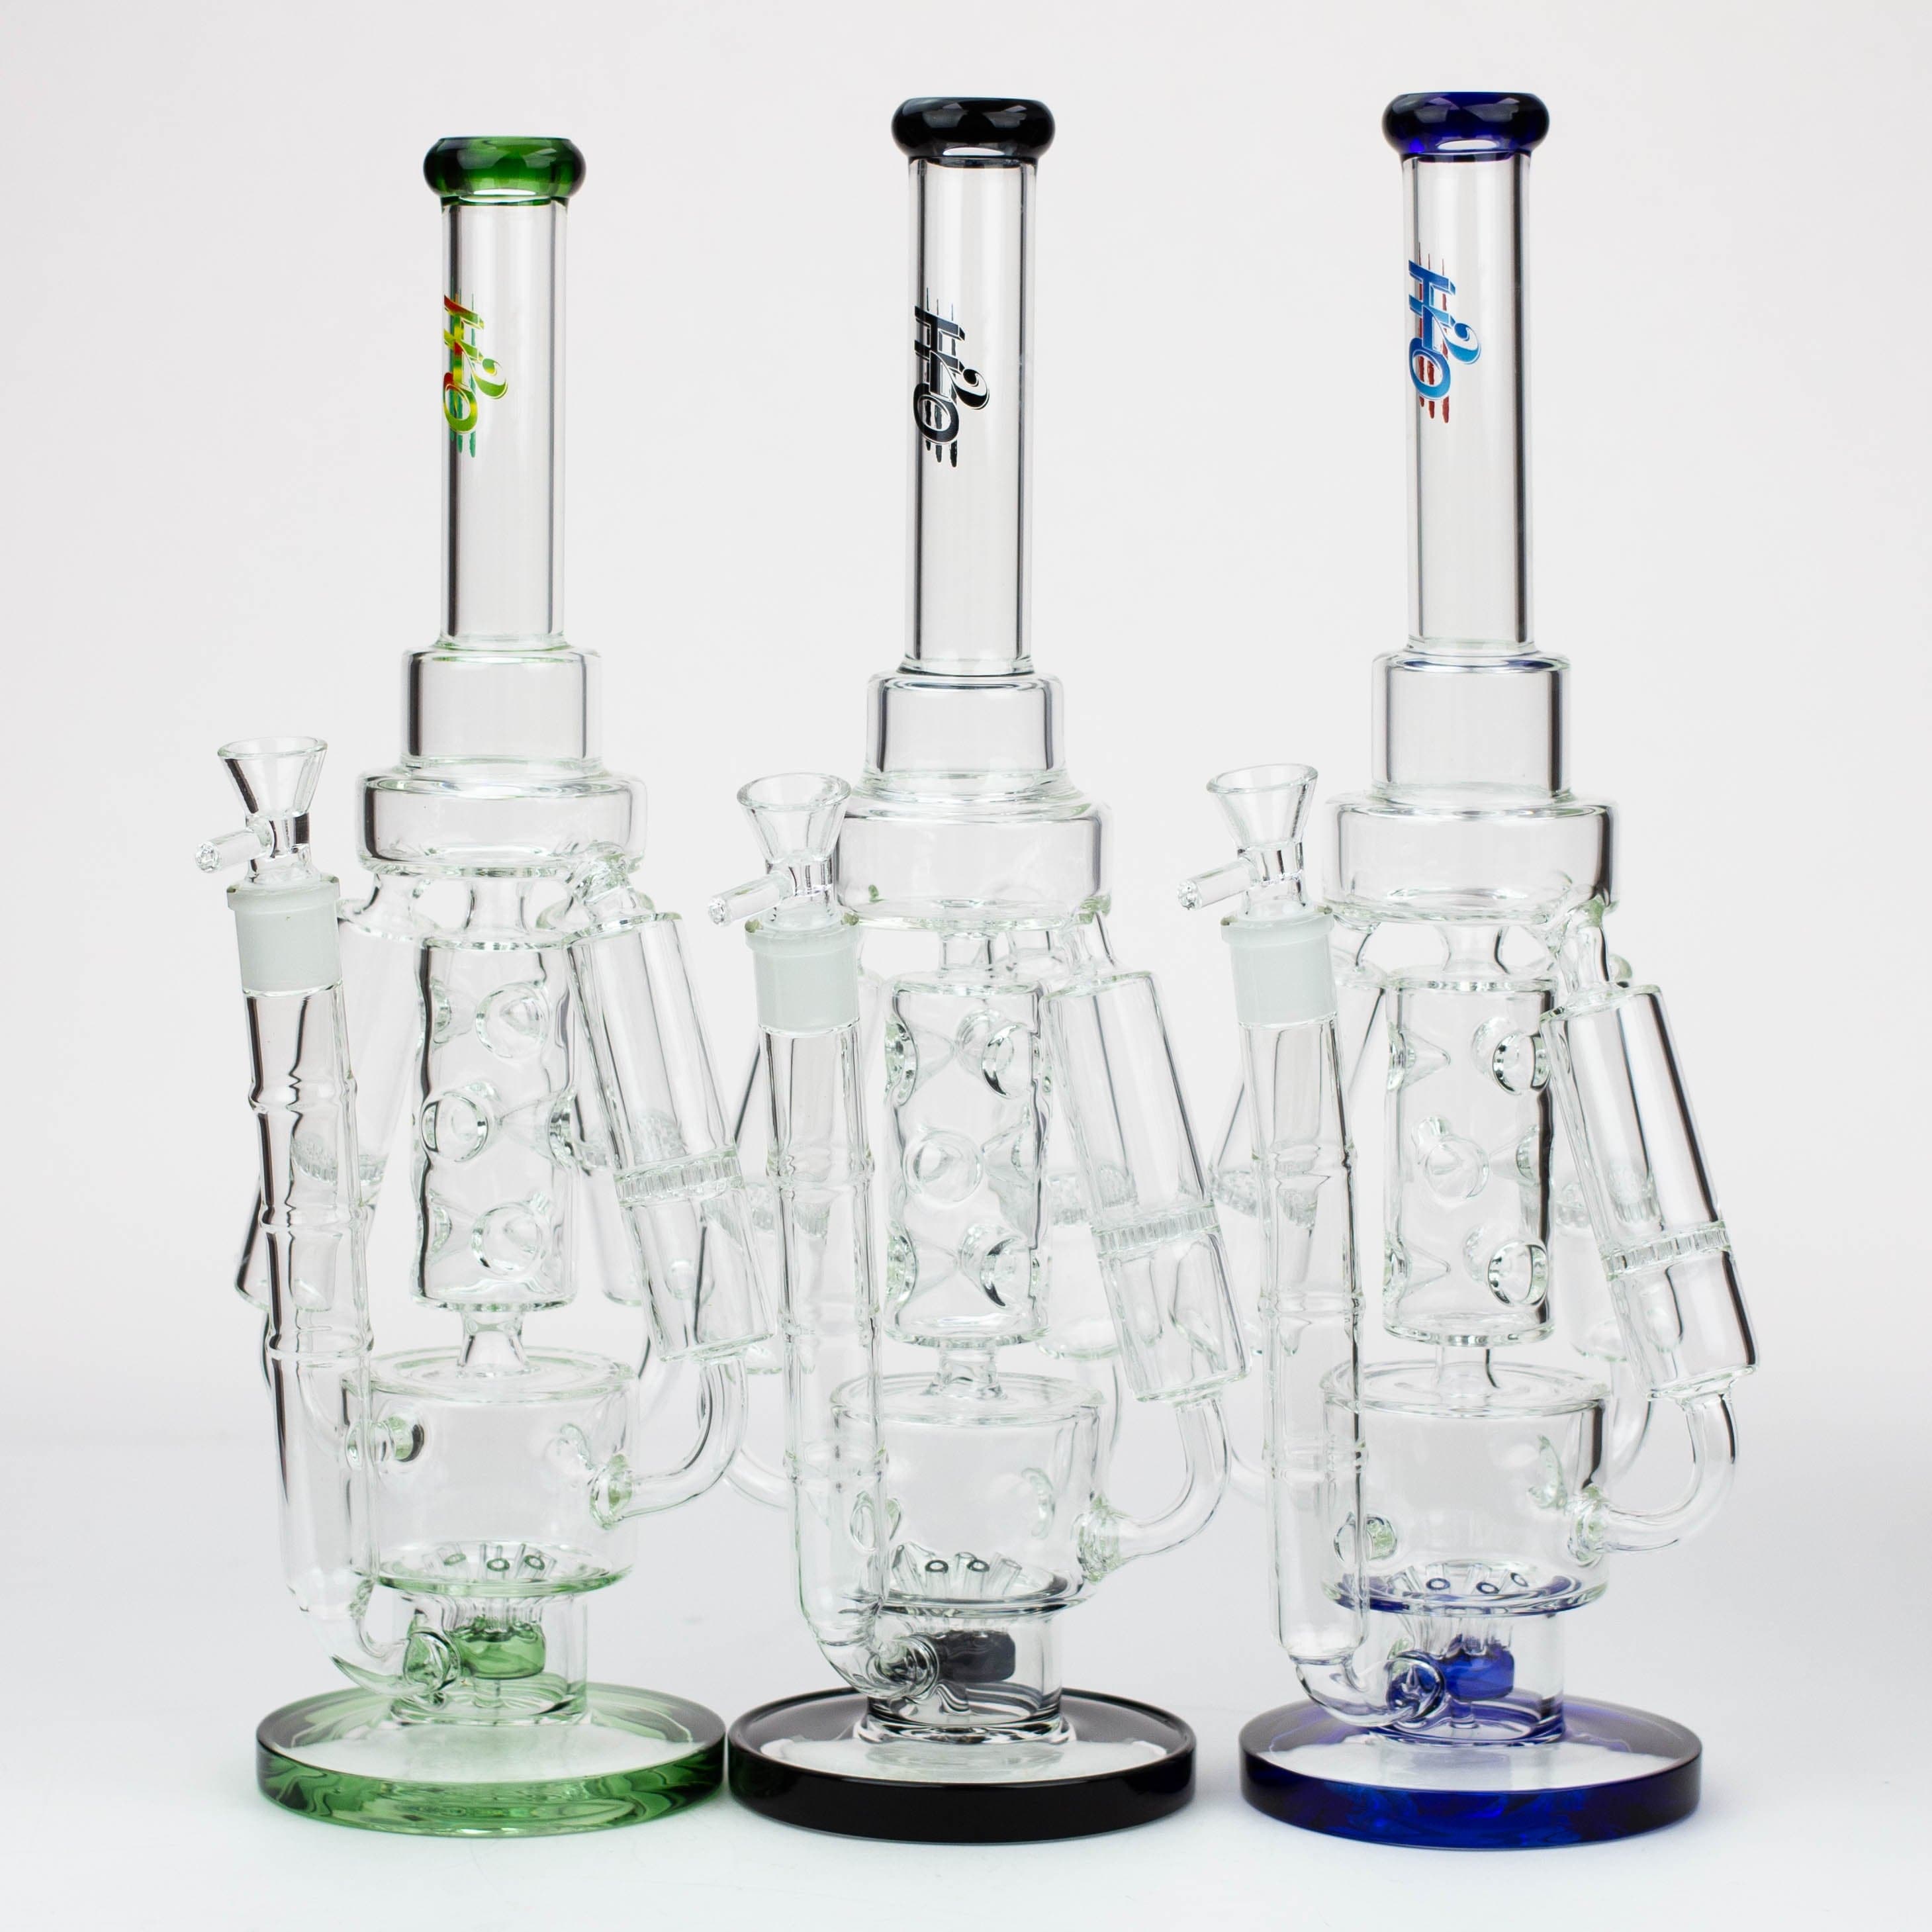 H2O Three Honeycomb silnders glass water recycle pipes 17"_0